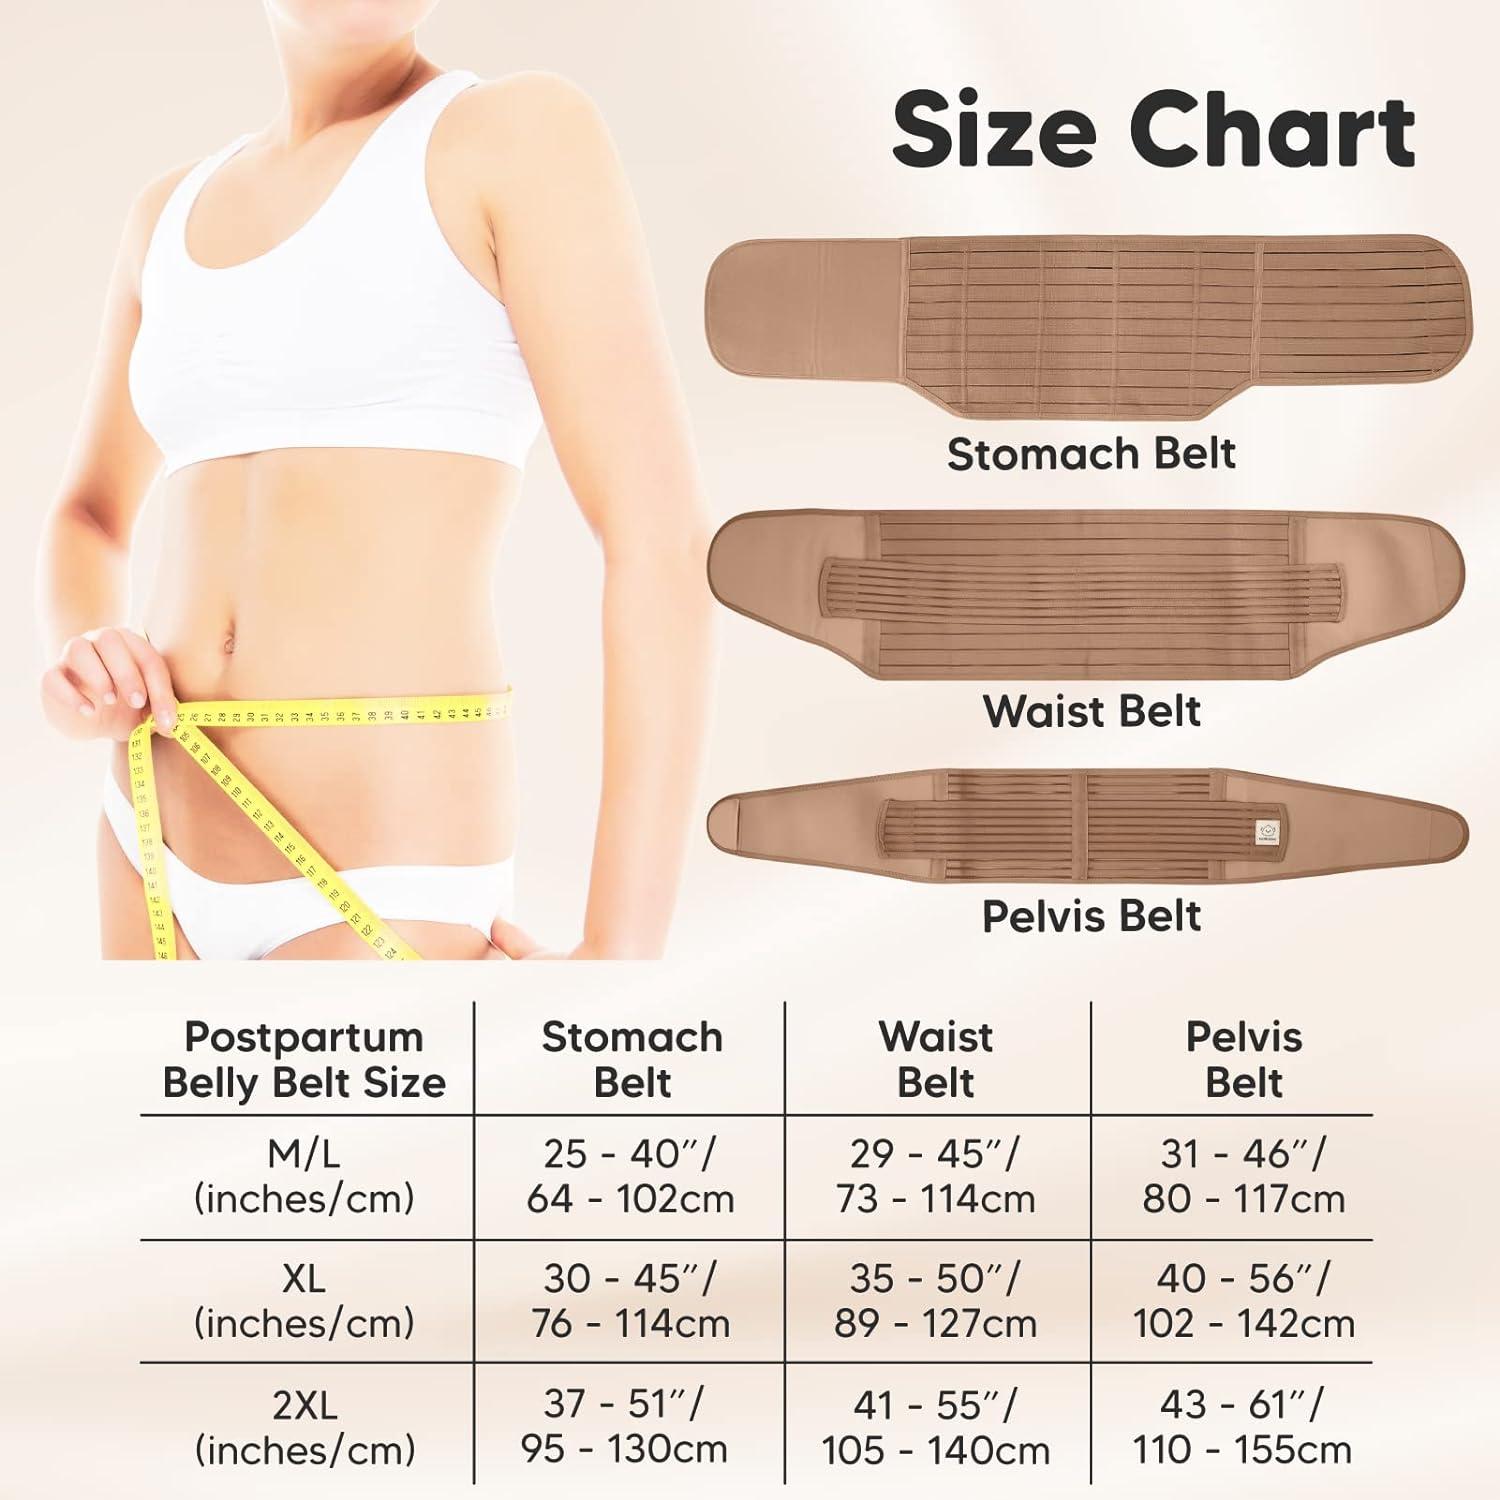 Find Cheap, Fashionable and Slimming postpartum girdles 